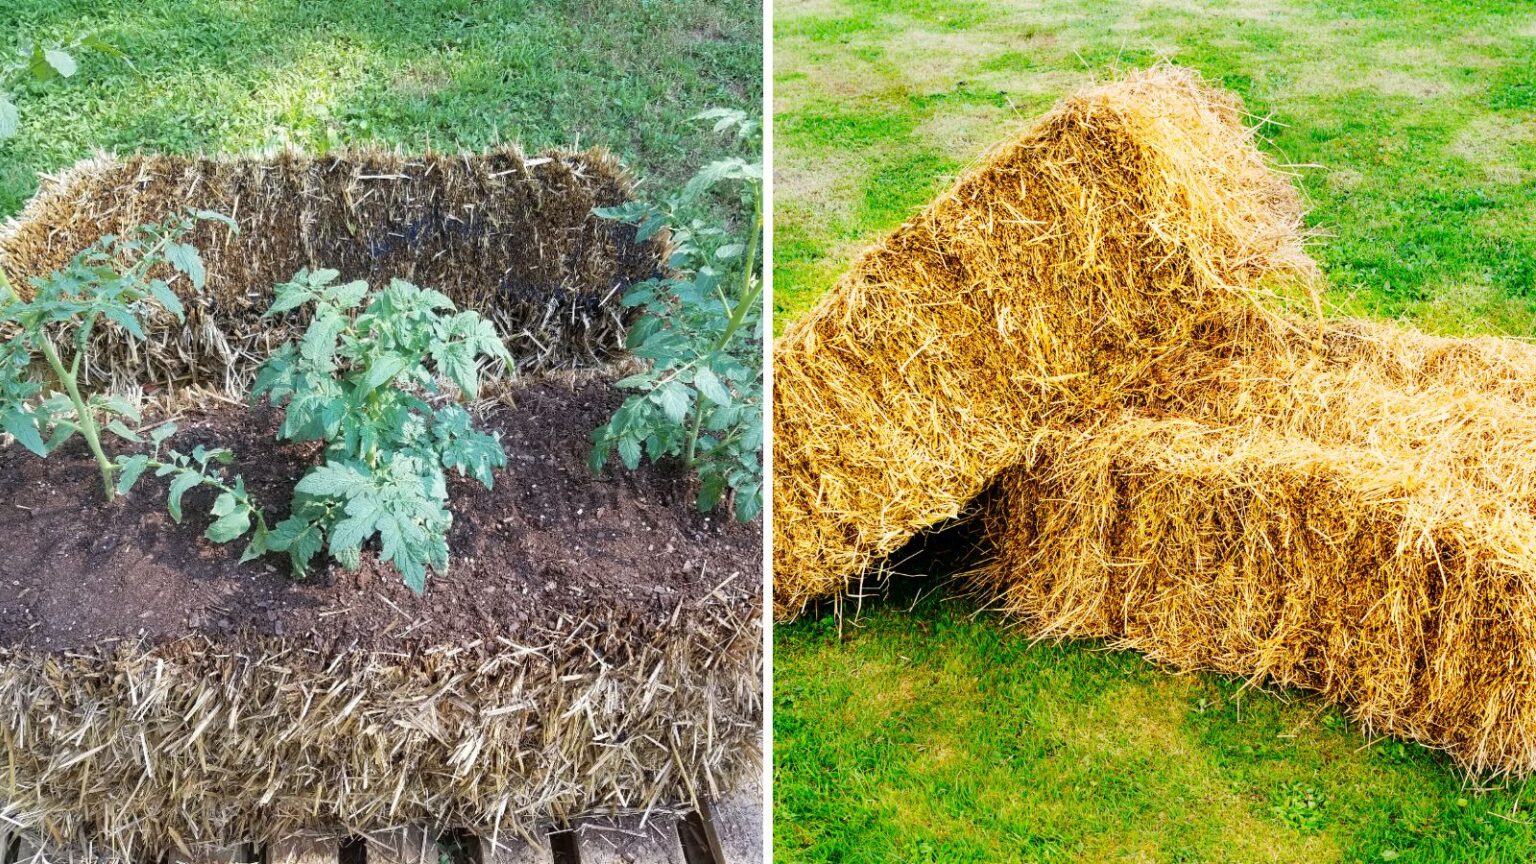 How To Plant A Straw Bale Garden So It Thrives Garden Beds